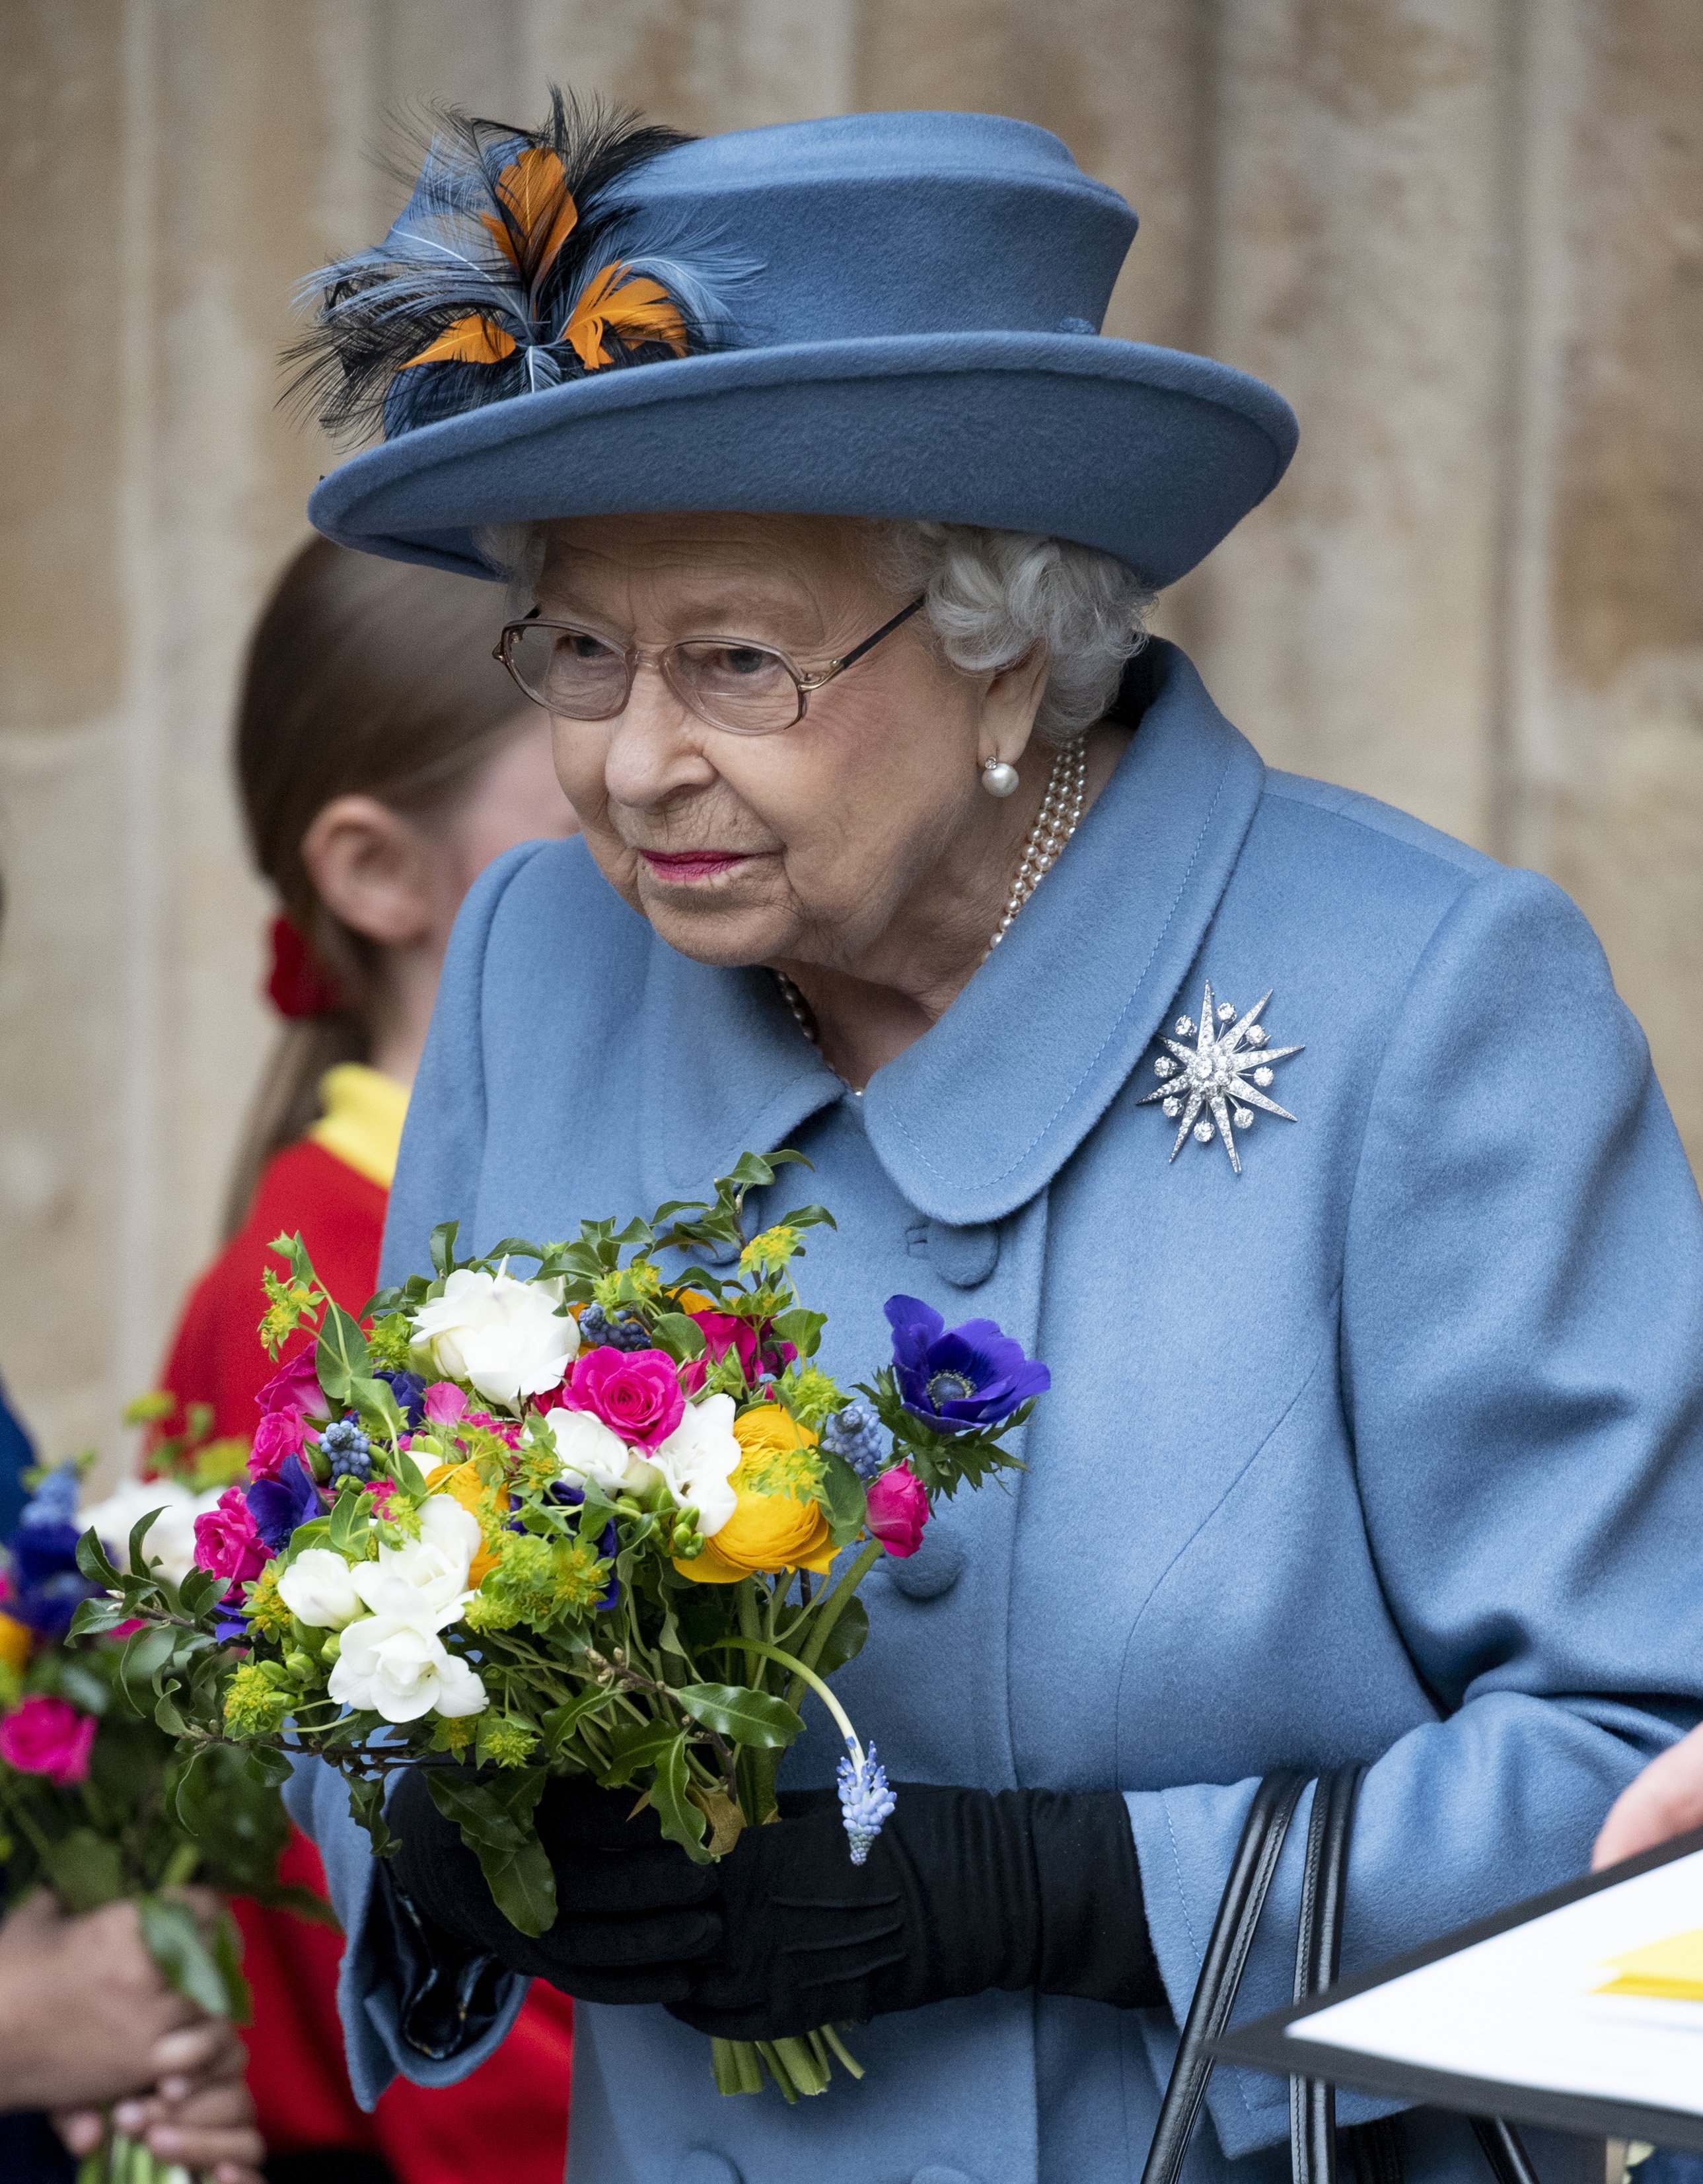 Queen Elizabeth II attends the Commonwealth Day Service 2020 at Westminster Abbey on March 9, 2020, in London, England. | Source: Getty Images.